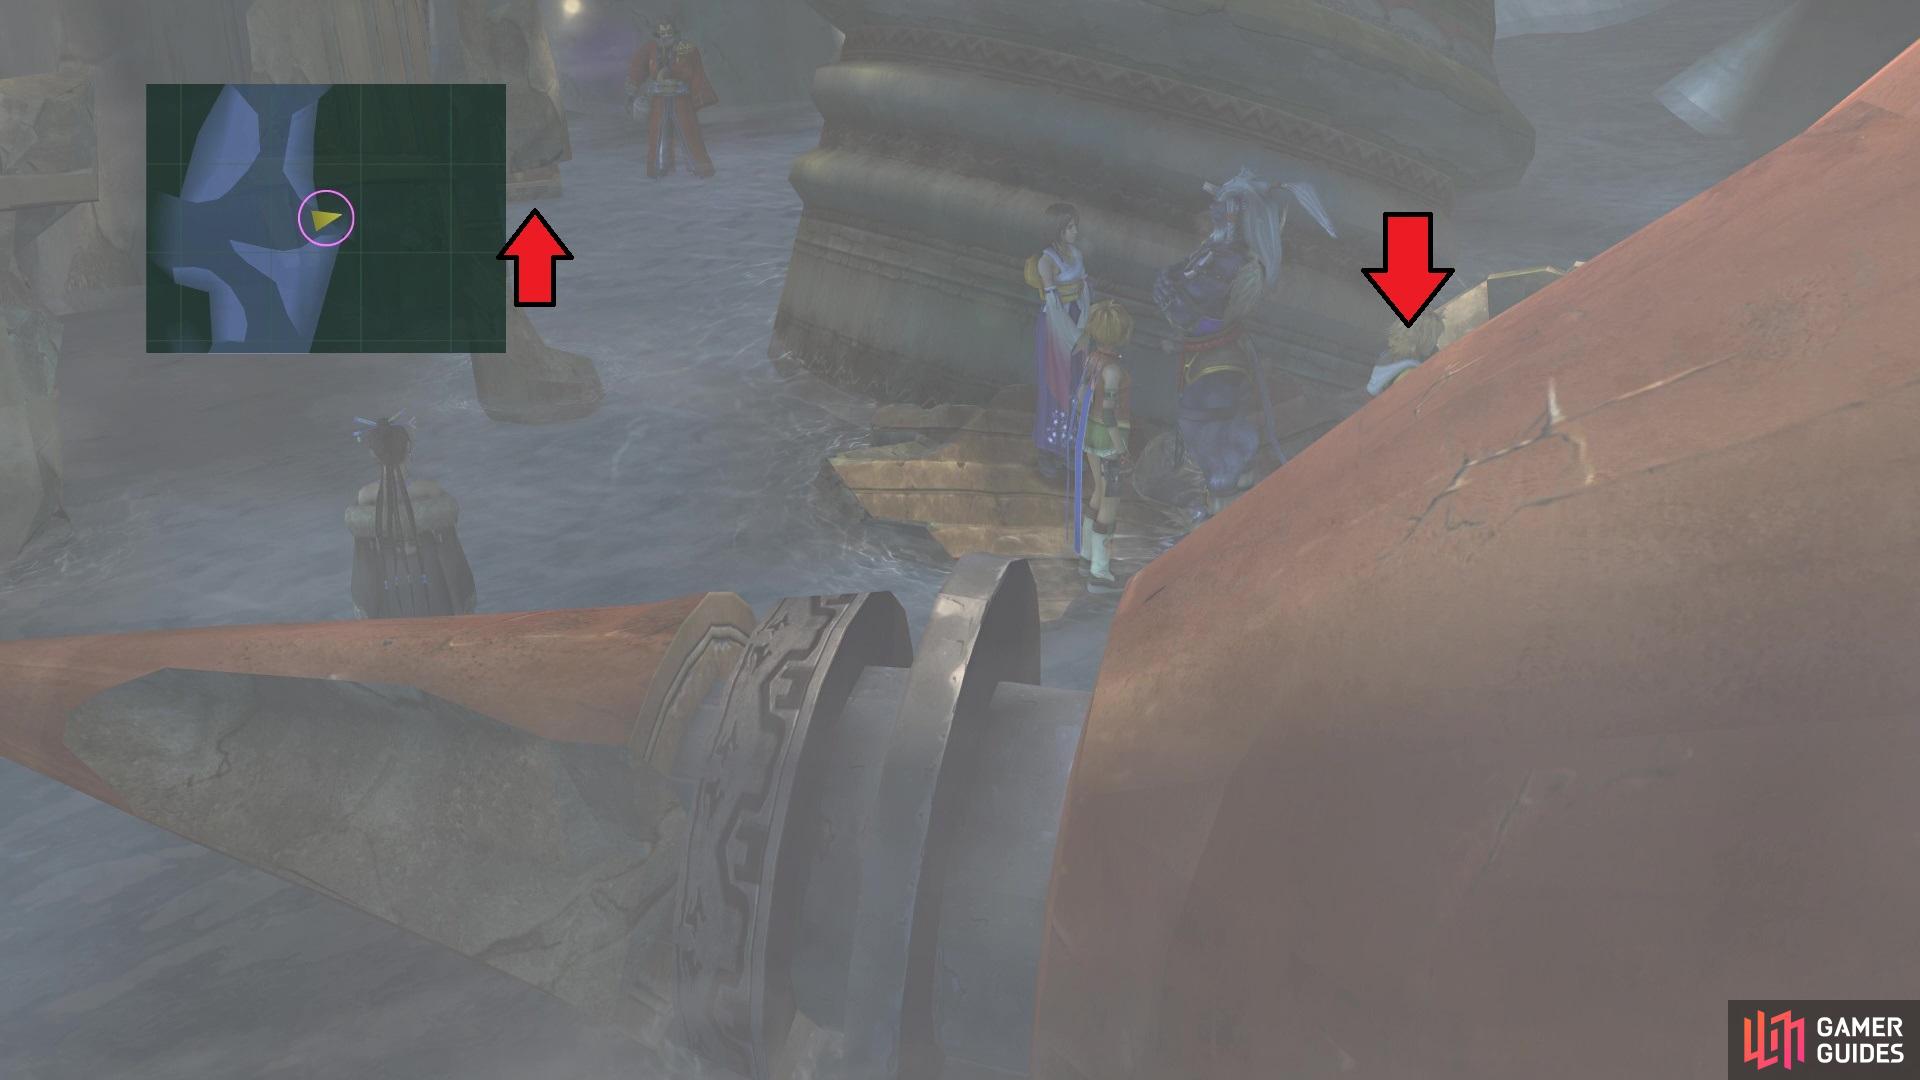 You can find the two chests where the arrows are pointing